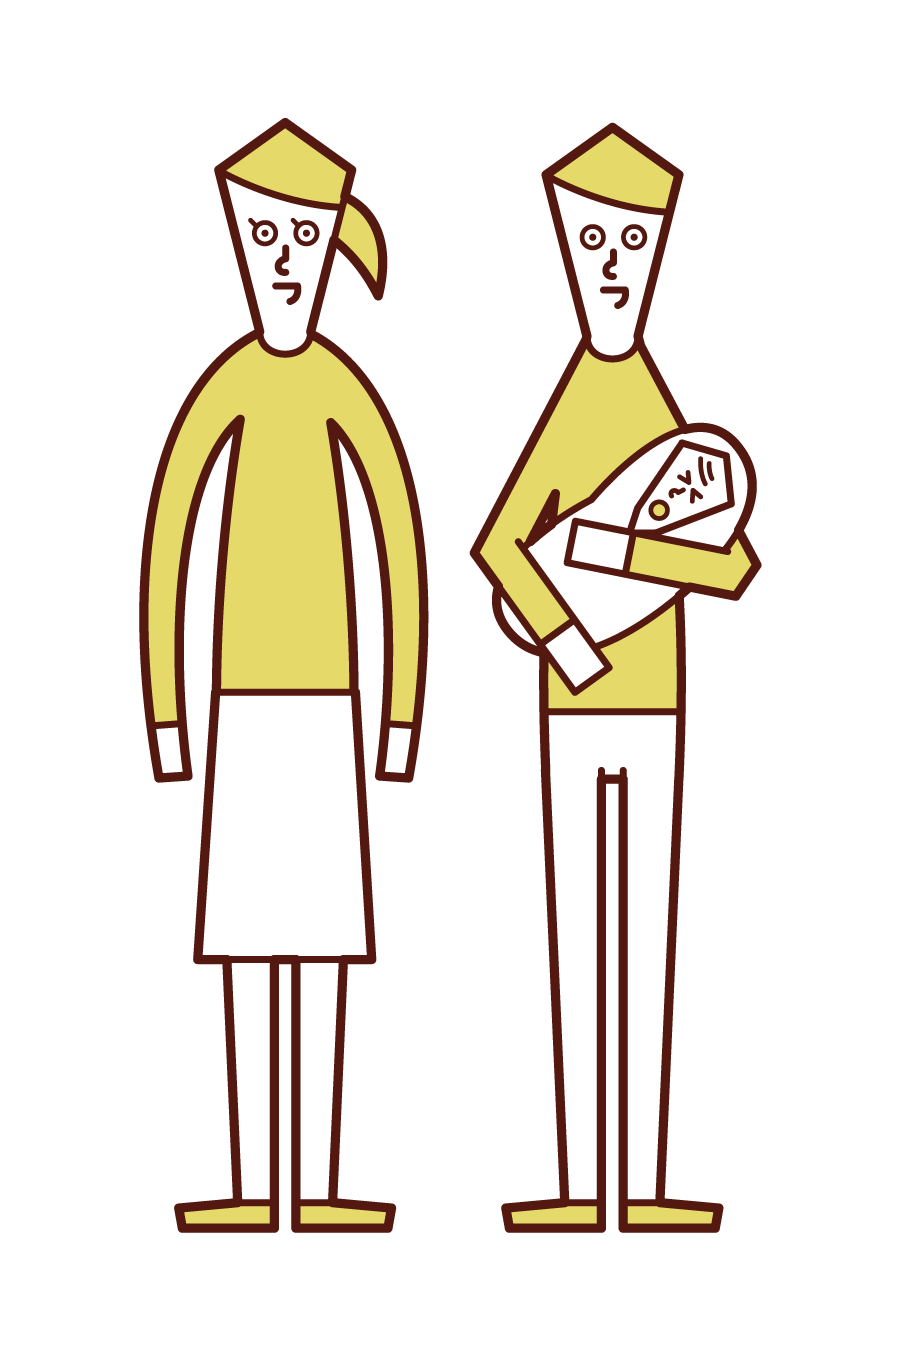 Illustration of a couple holding a child